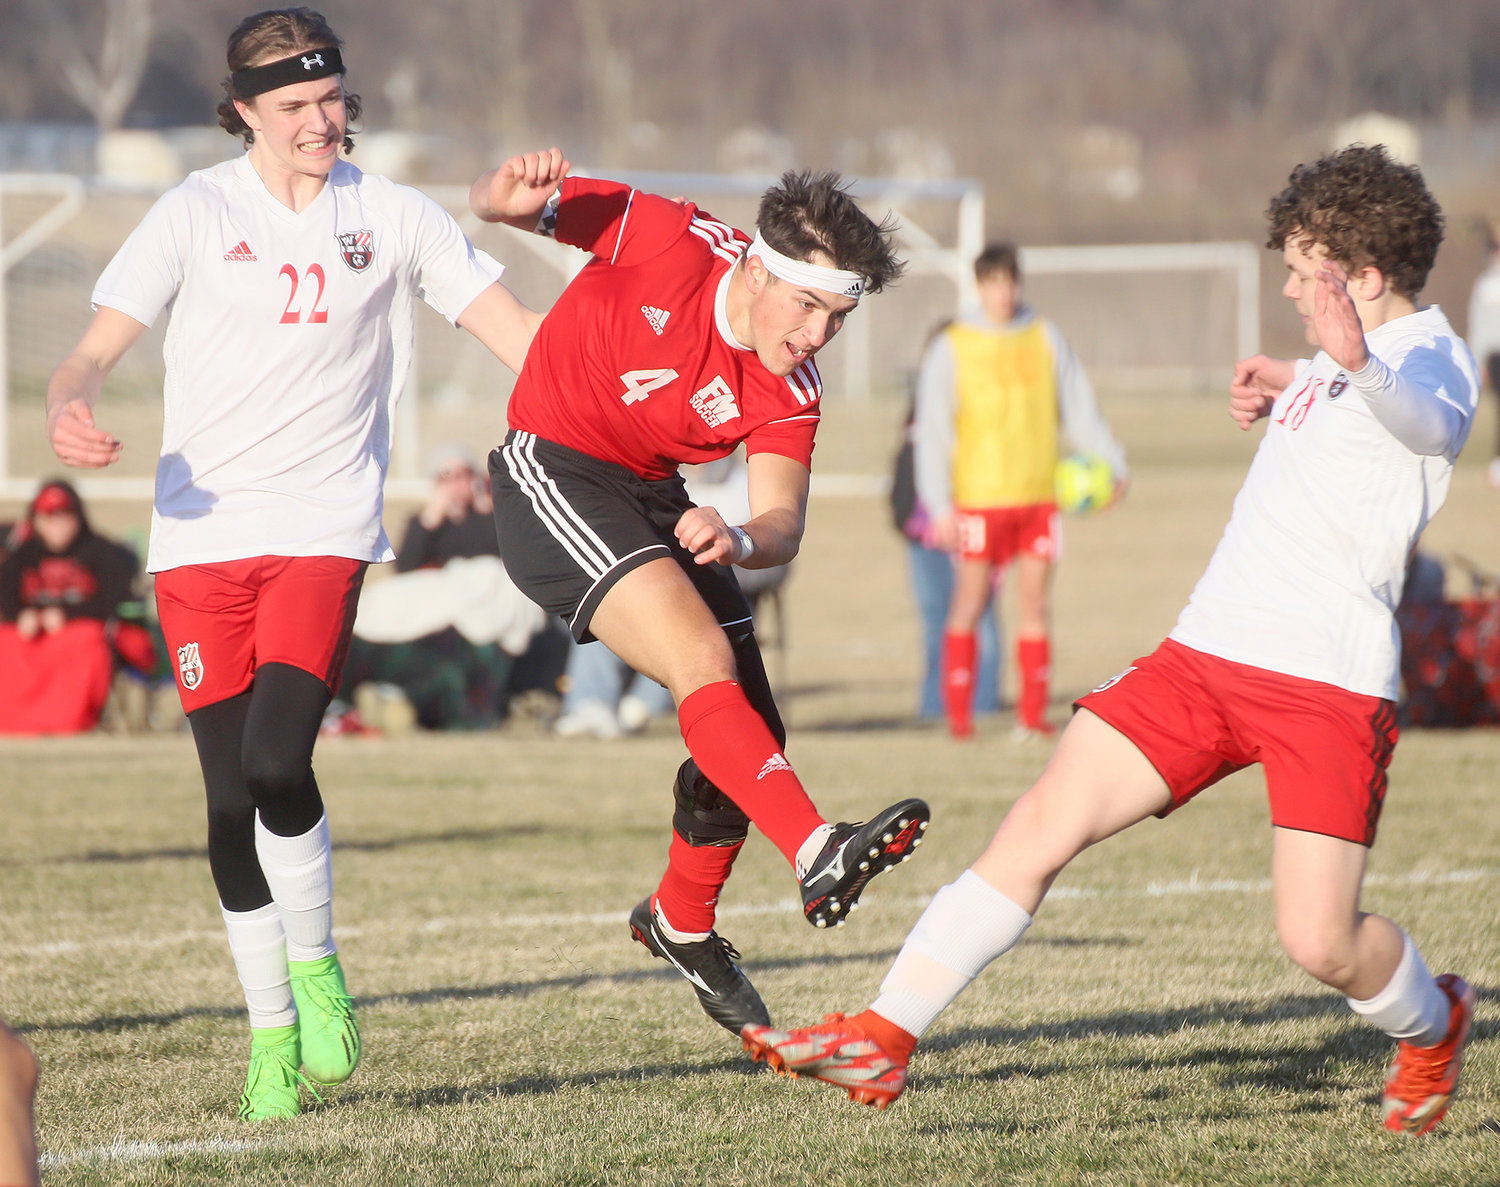 Jacob Pothitakis fires a shot between a couple Williamsburg Raiders Tuesday evening in Fort Madison.